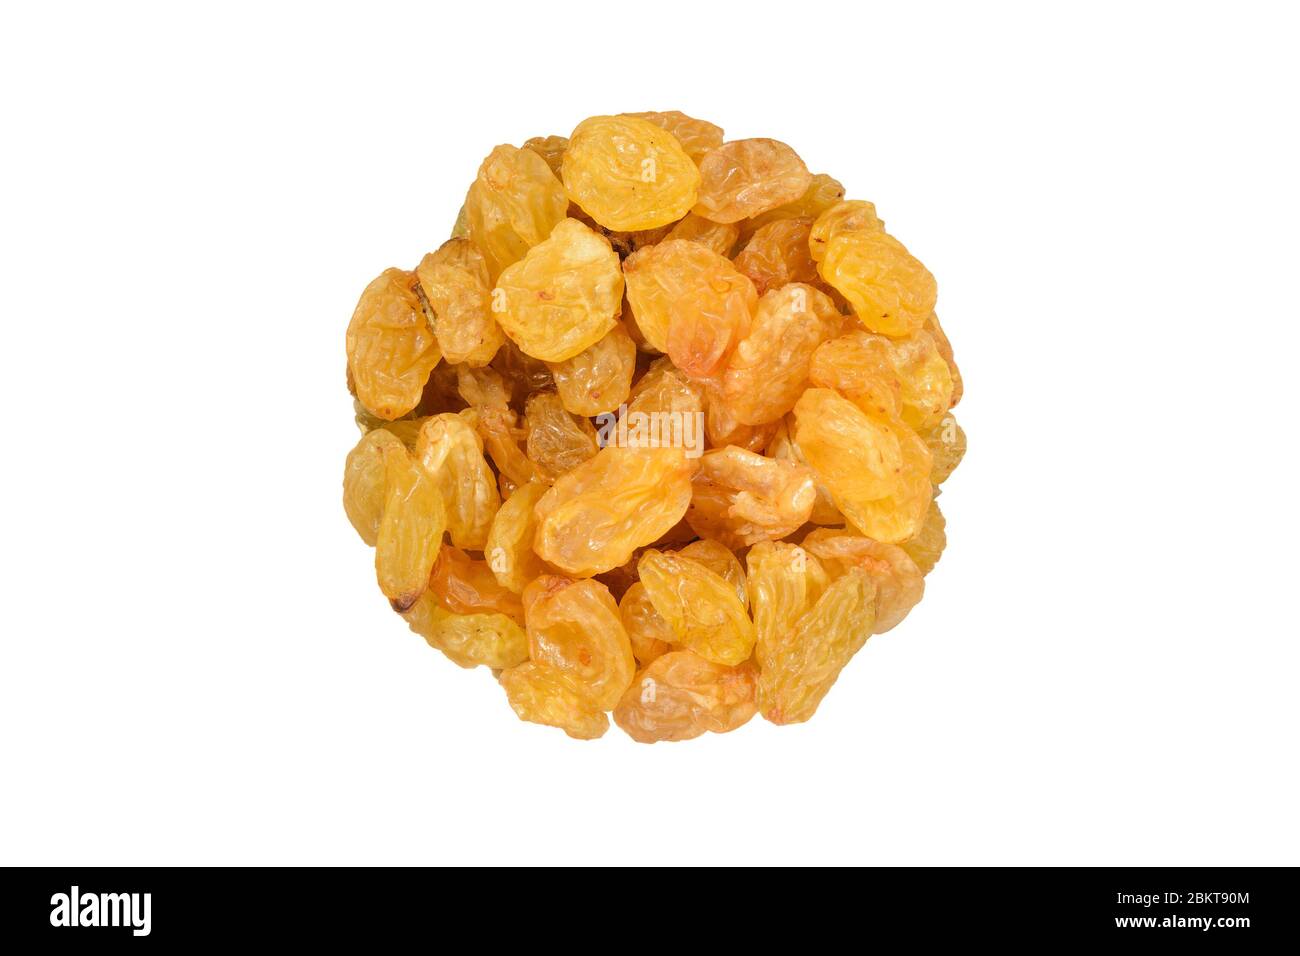 Yellow dry raisins isolated on white background. Top view. Stock Photo